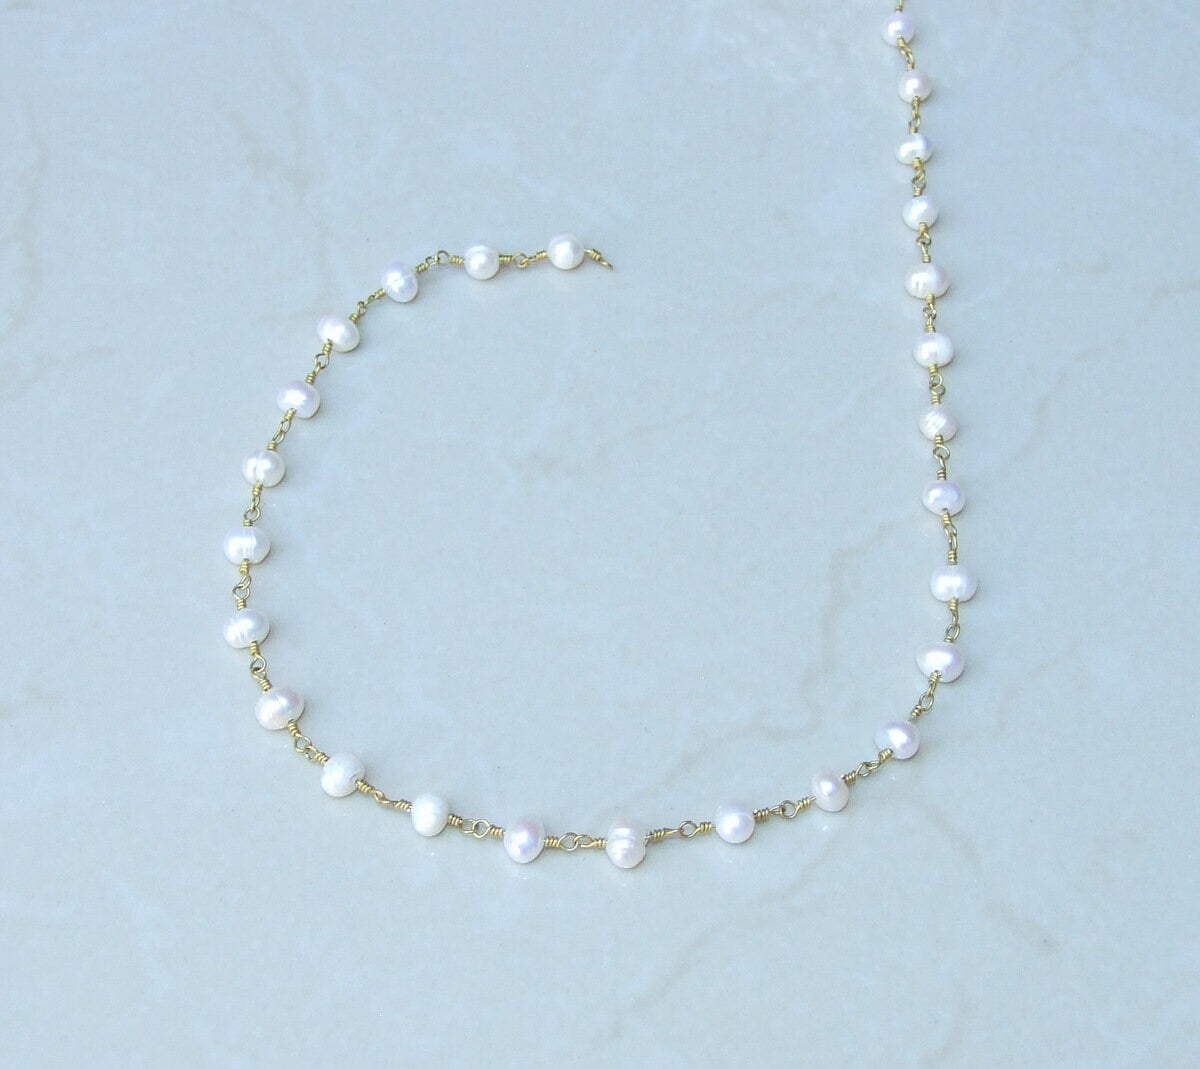 White Freshwater Pearl Rosary Chain - Wire Wrapped Chain,  Natural Freshwater Pearls - Potato Shaped Pearls - 6-7mm - Sold by the Foot